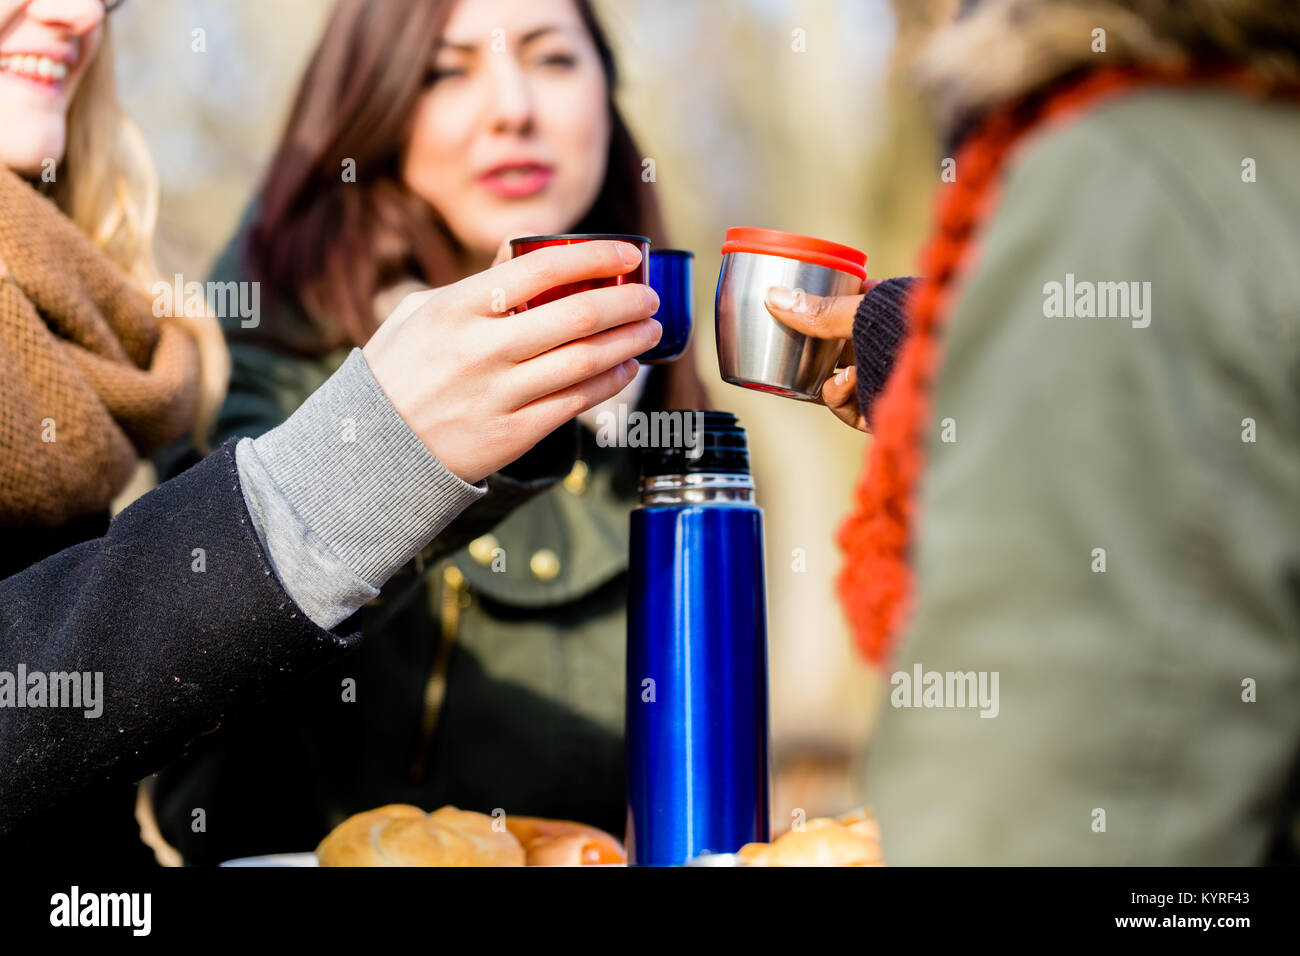 Young female friends drinking a hot beverage outdoors in winter Stock Photo